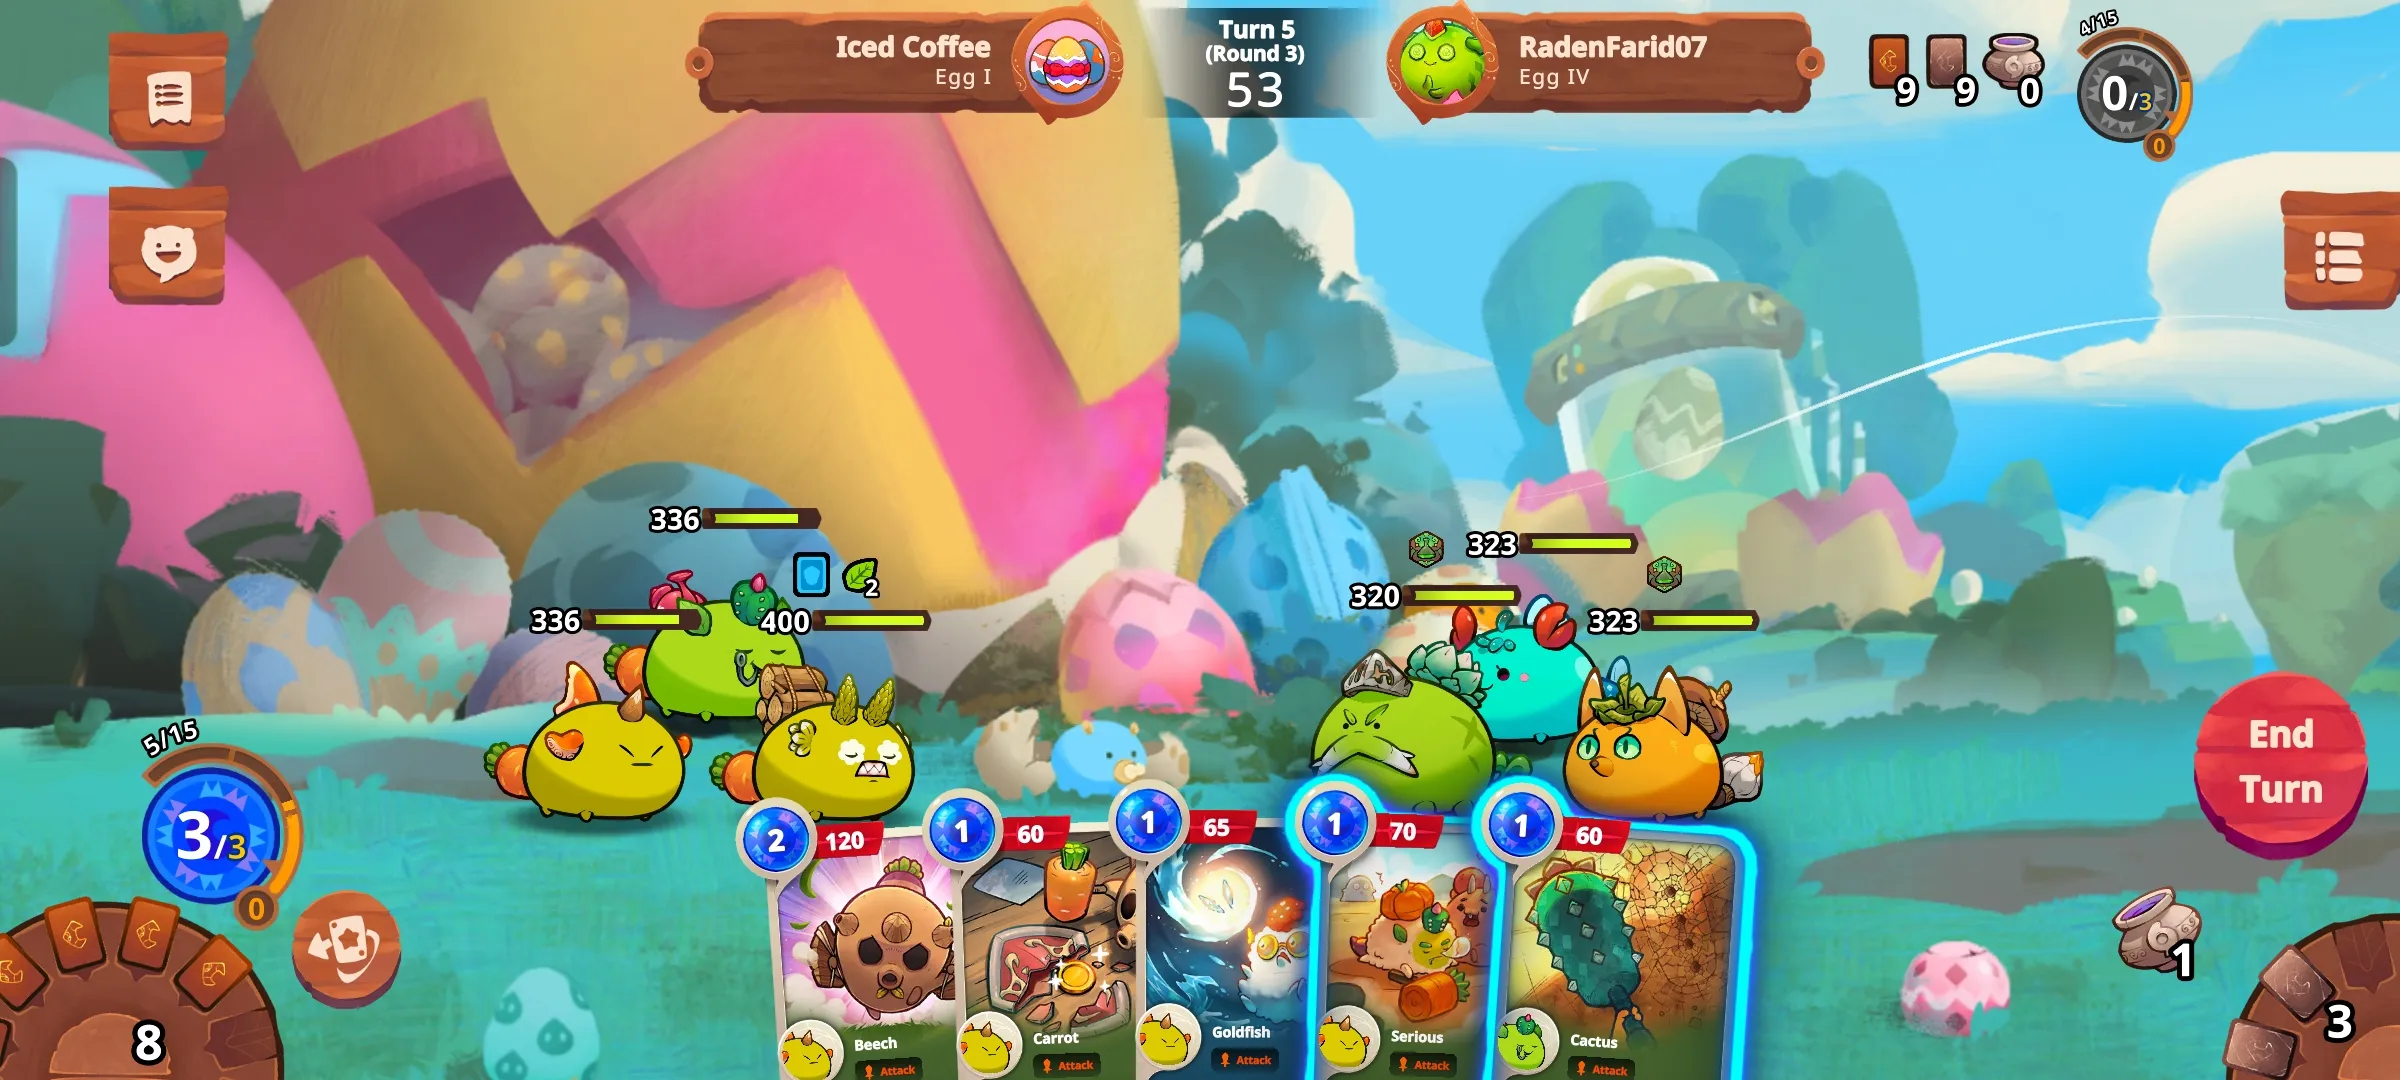 Axie Infinity Origins Arena mode is where two players fight against each other and play their cards strategically to win rewards and climb up the Leaderboards.